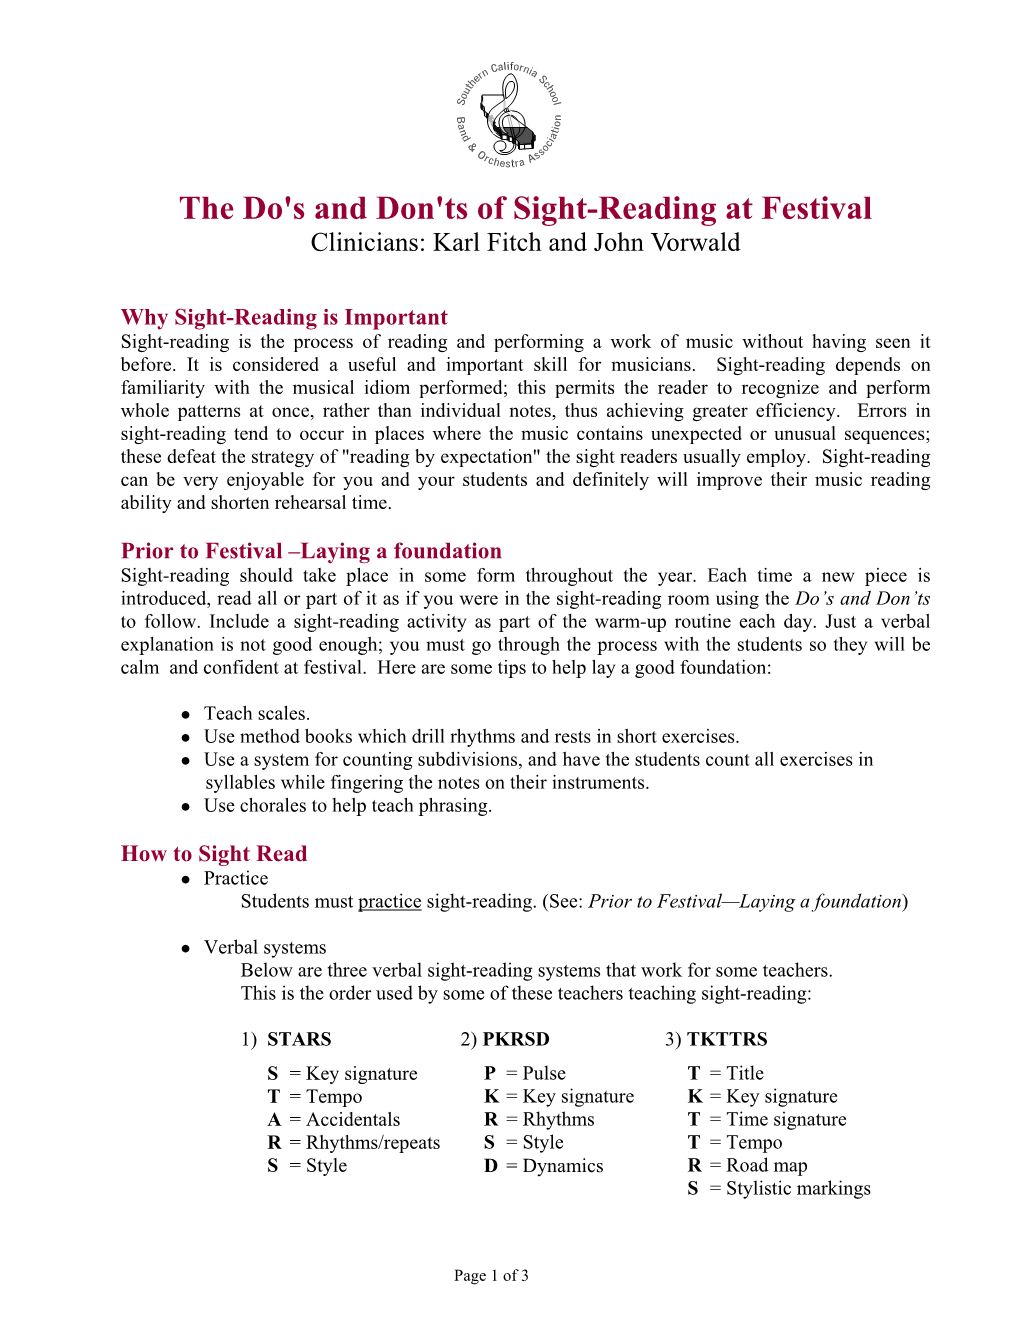 The Do's and Don'ts of Sight-Reading at Festival Clinicians: Karl Fitch and John Vorwald